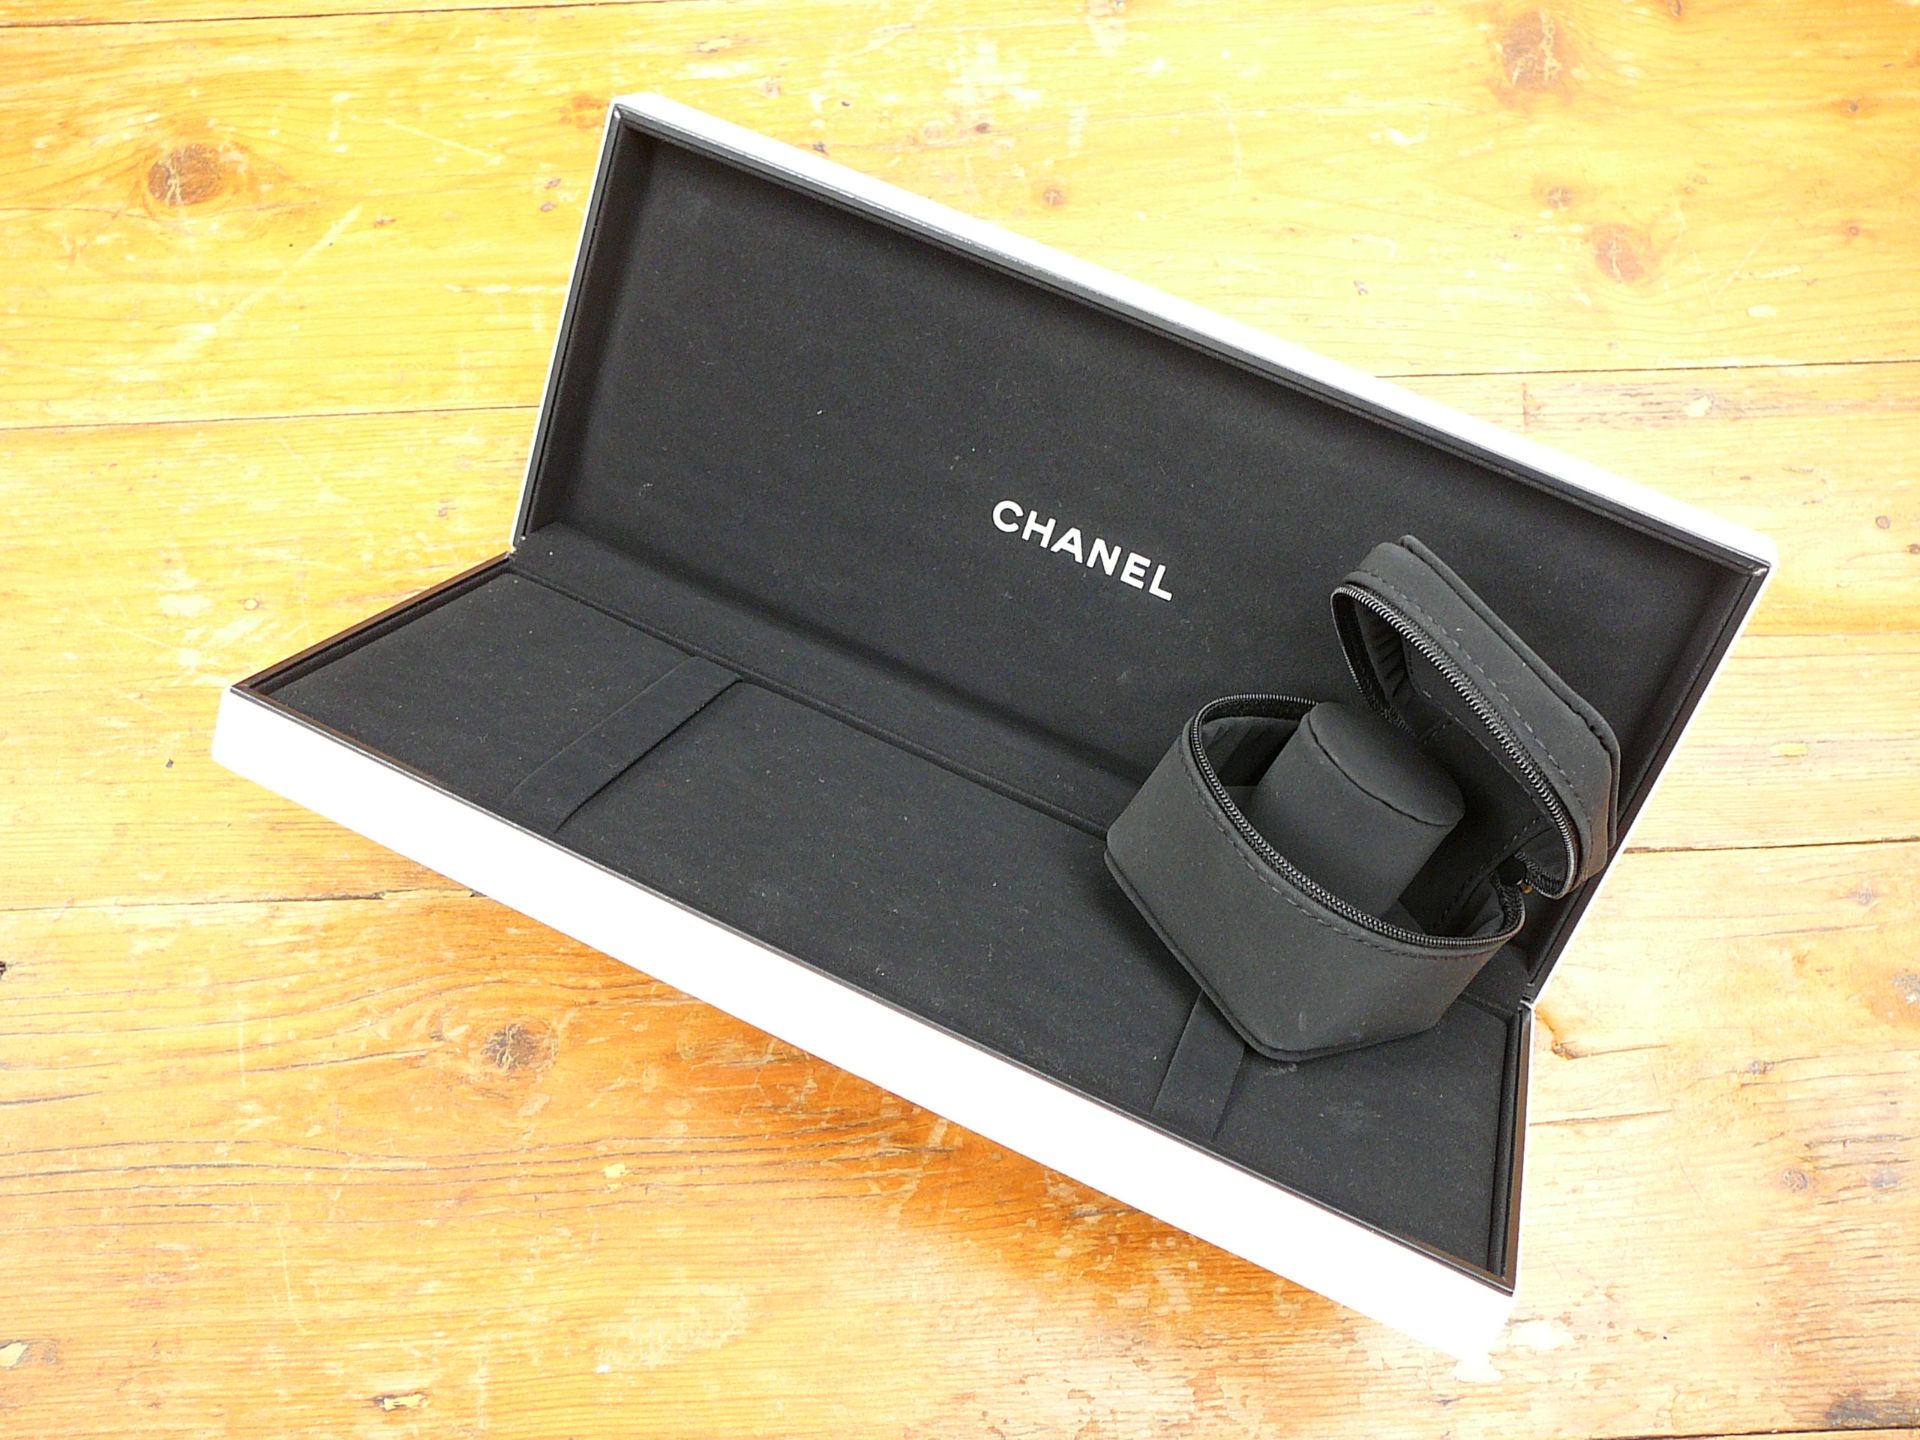 Chanel watch boxes